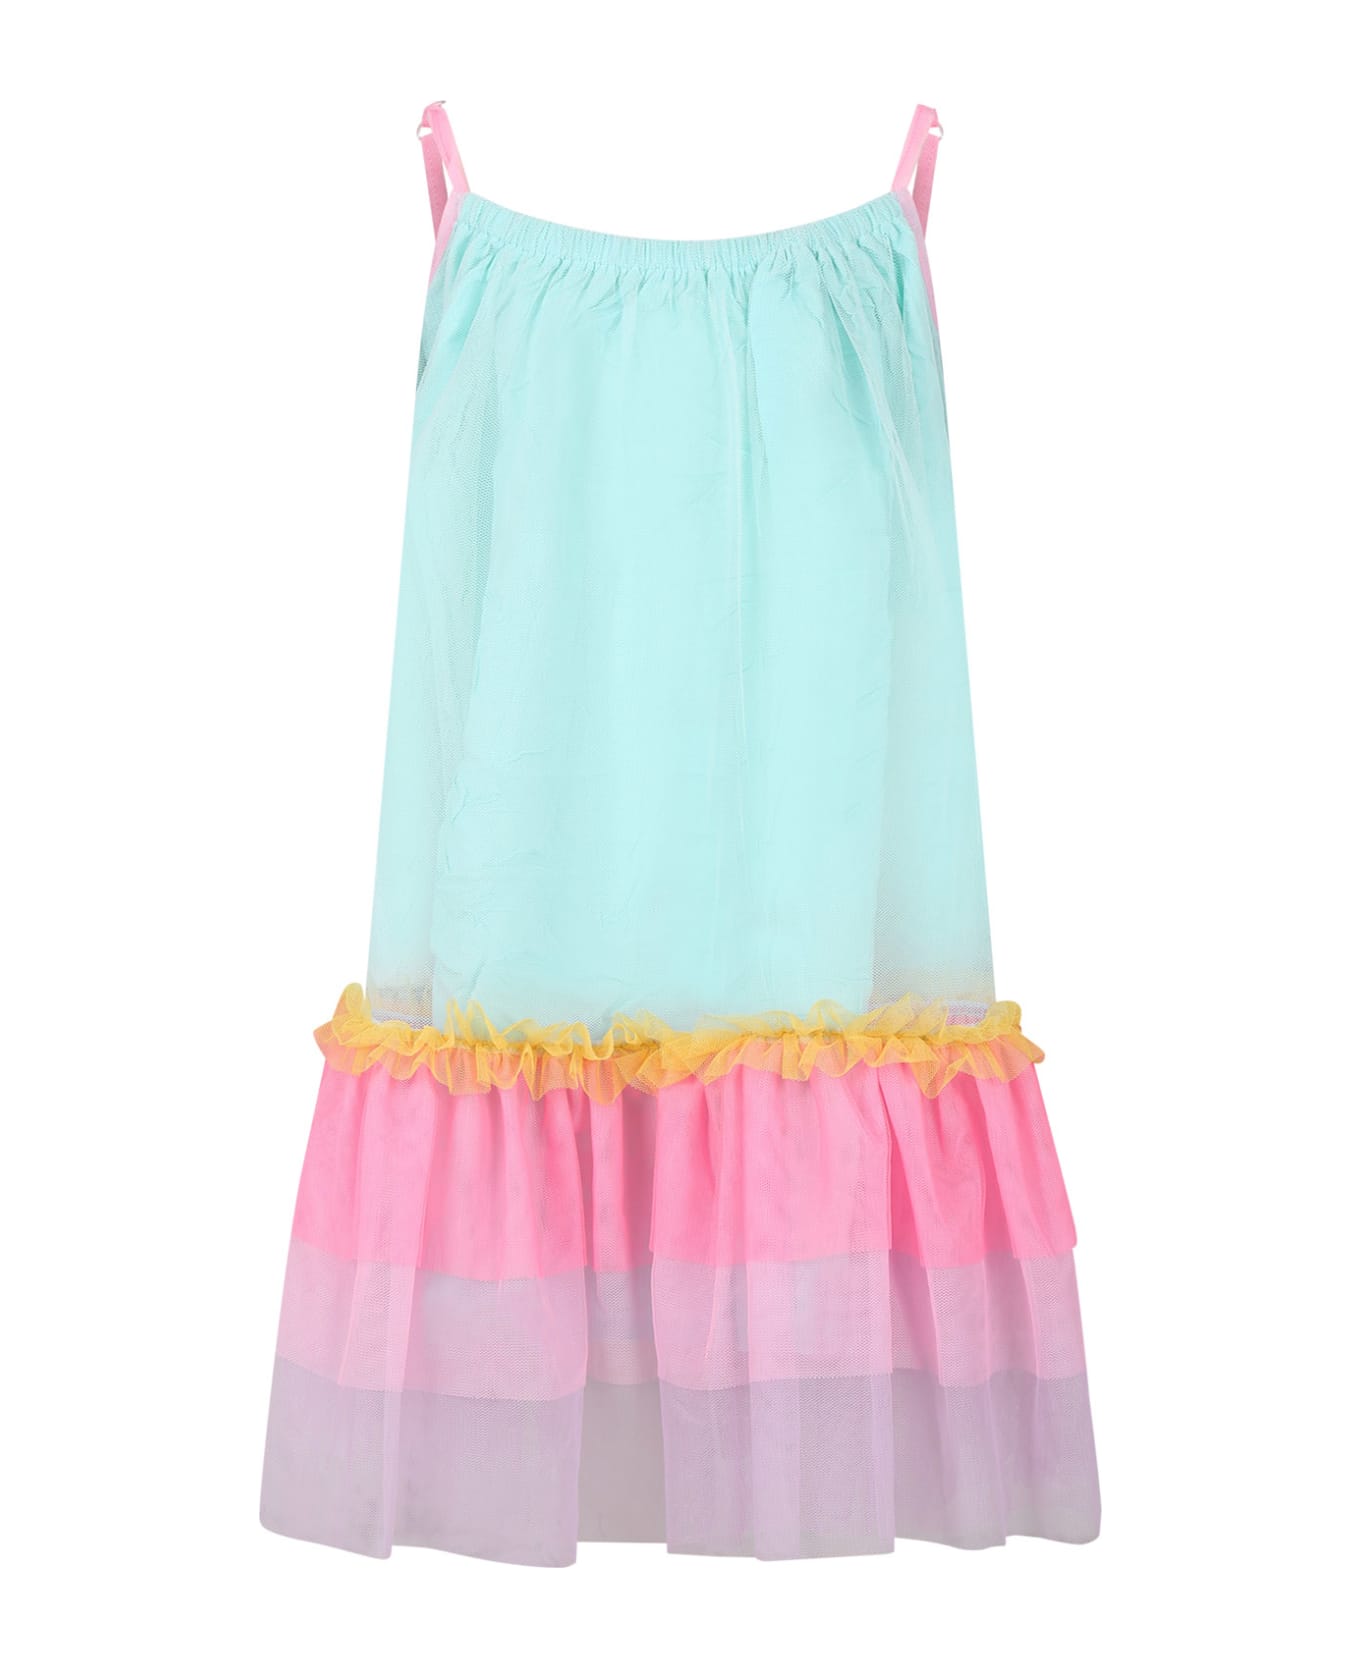 Billieblush Multicolor Dress For Girl With Ruffles And Flounces - Multicolor ワンピース＆ドレス